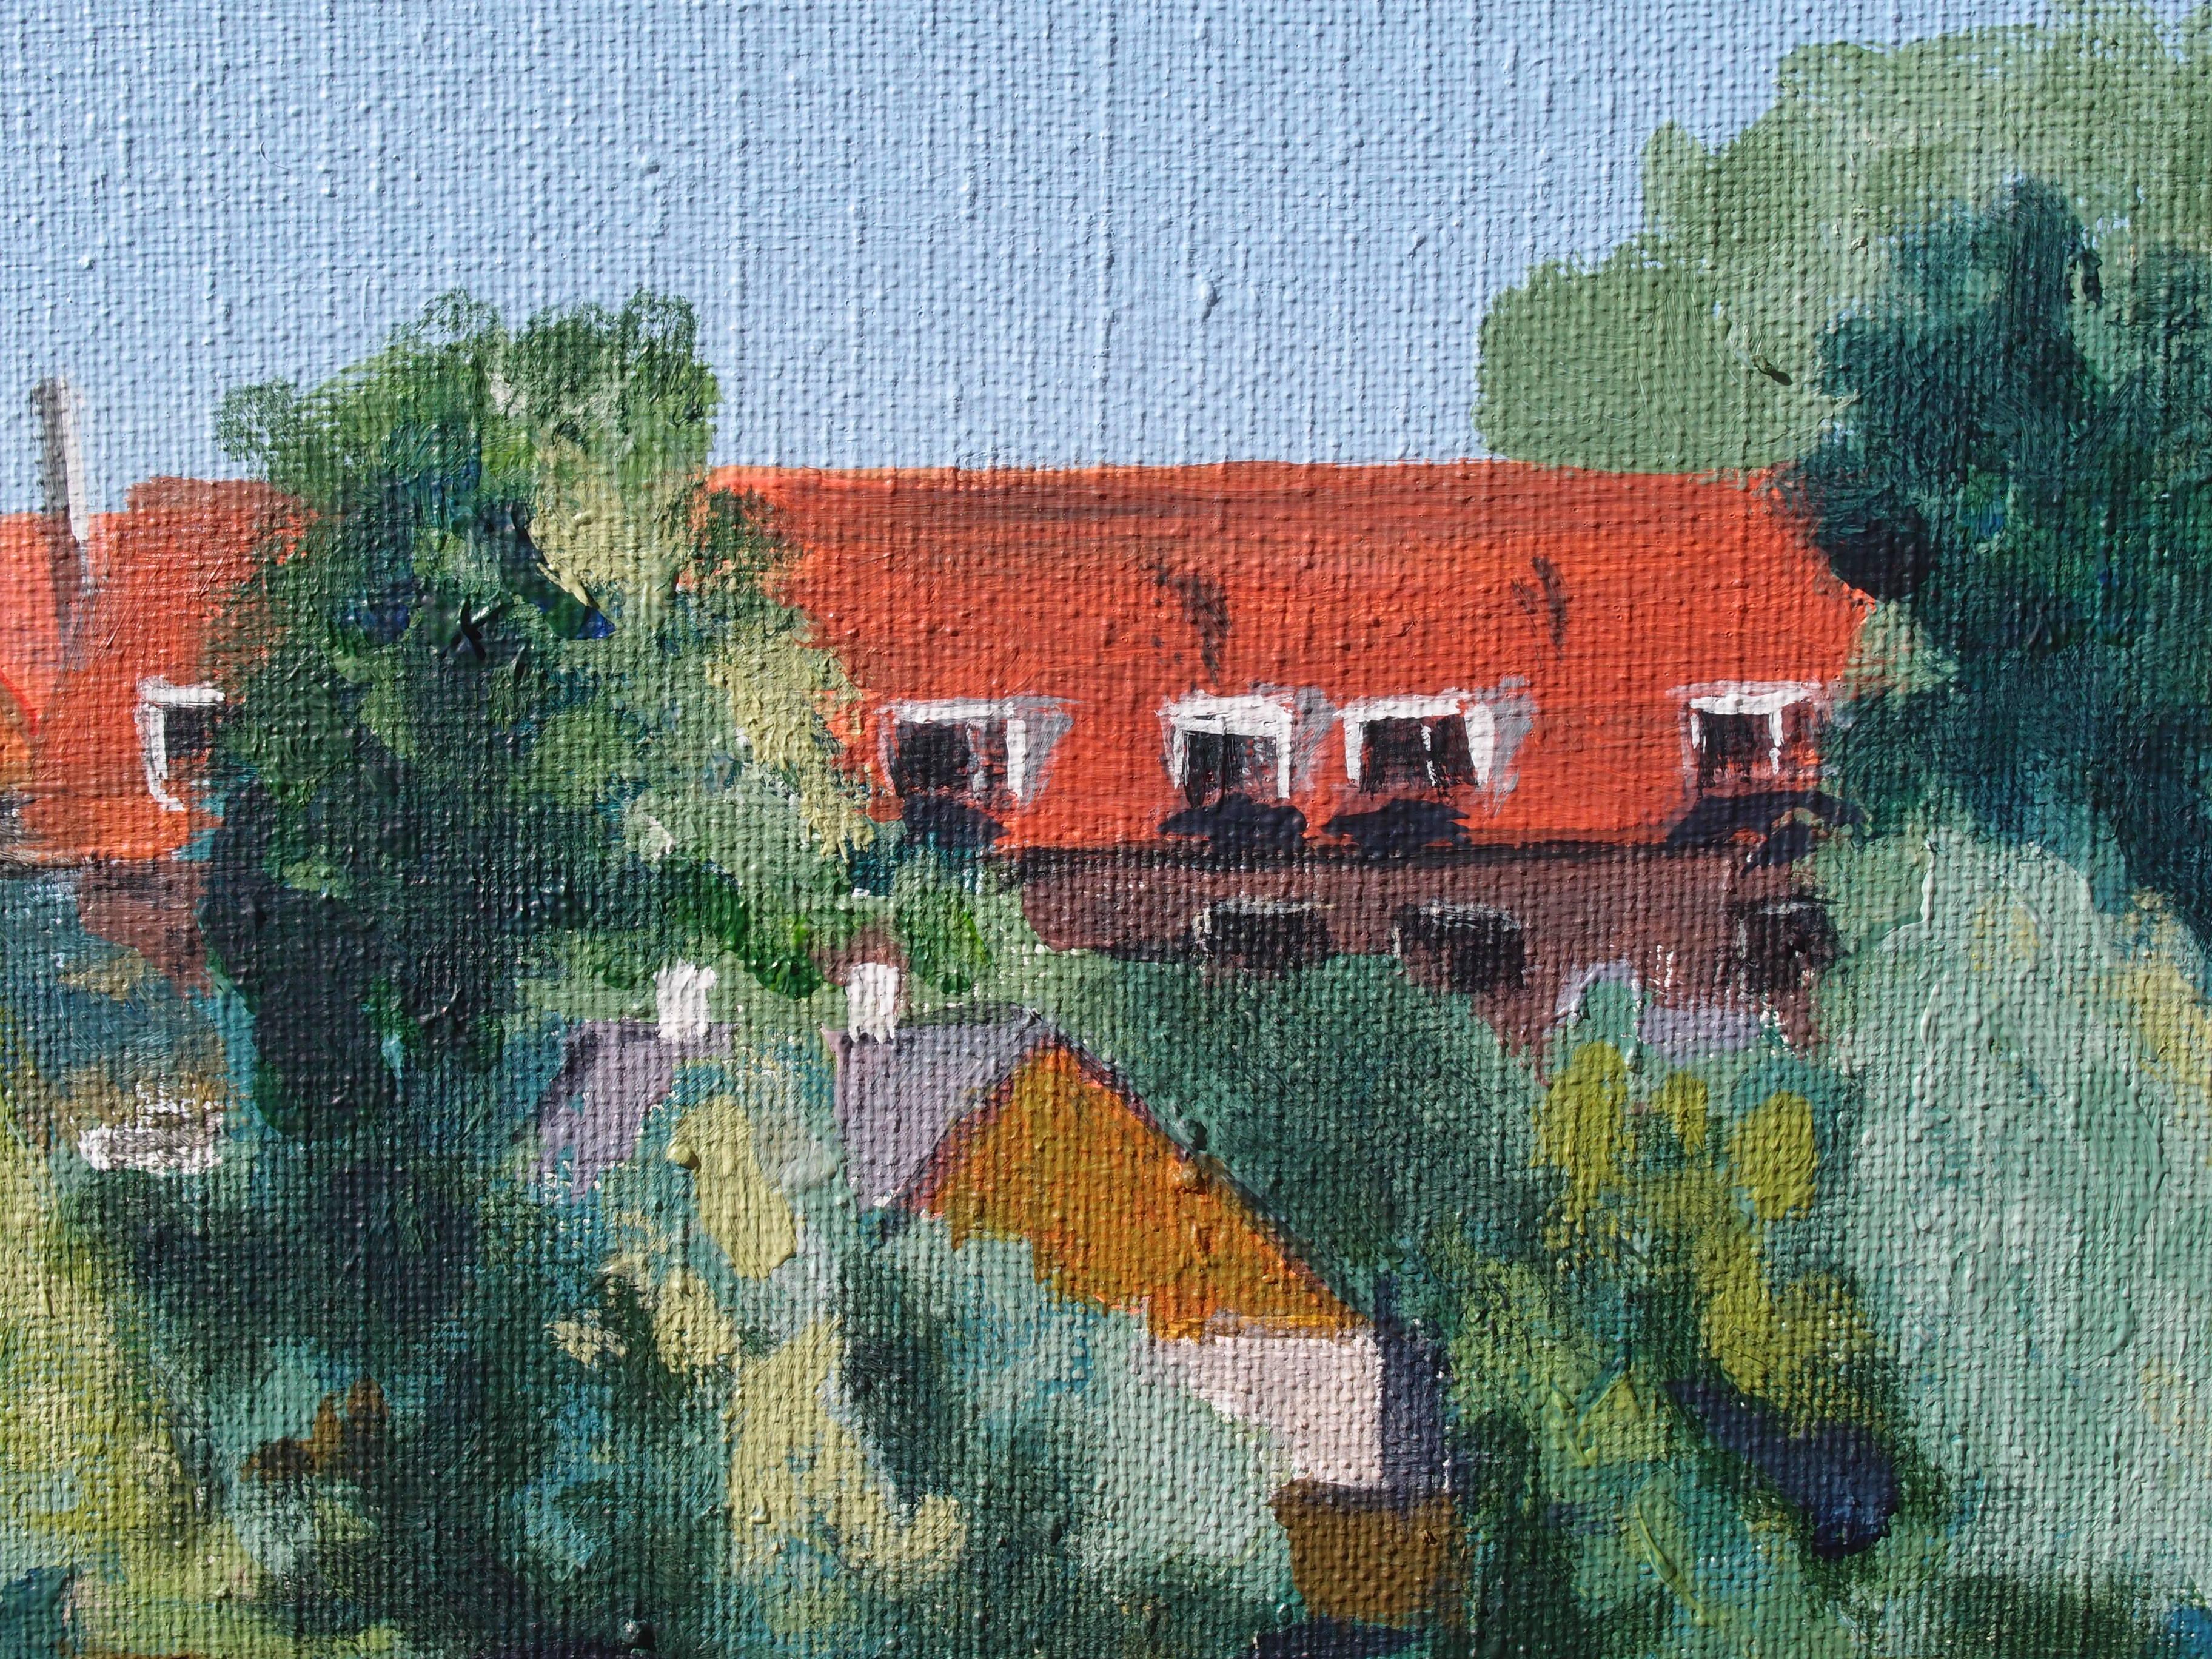 City of Gentofte, Denmark, seen from the lake.

Oil on canvas painting by Per Bülow

About the artist:

Per Bülow has painted since early childhood. He is mainly autodidact, but through the years he has consulted several established artists in